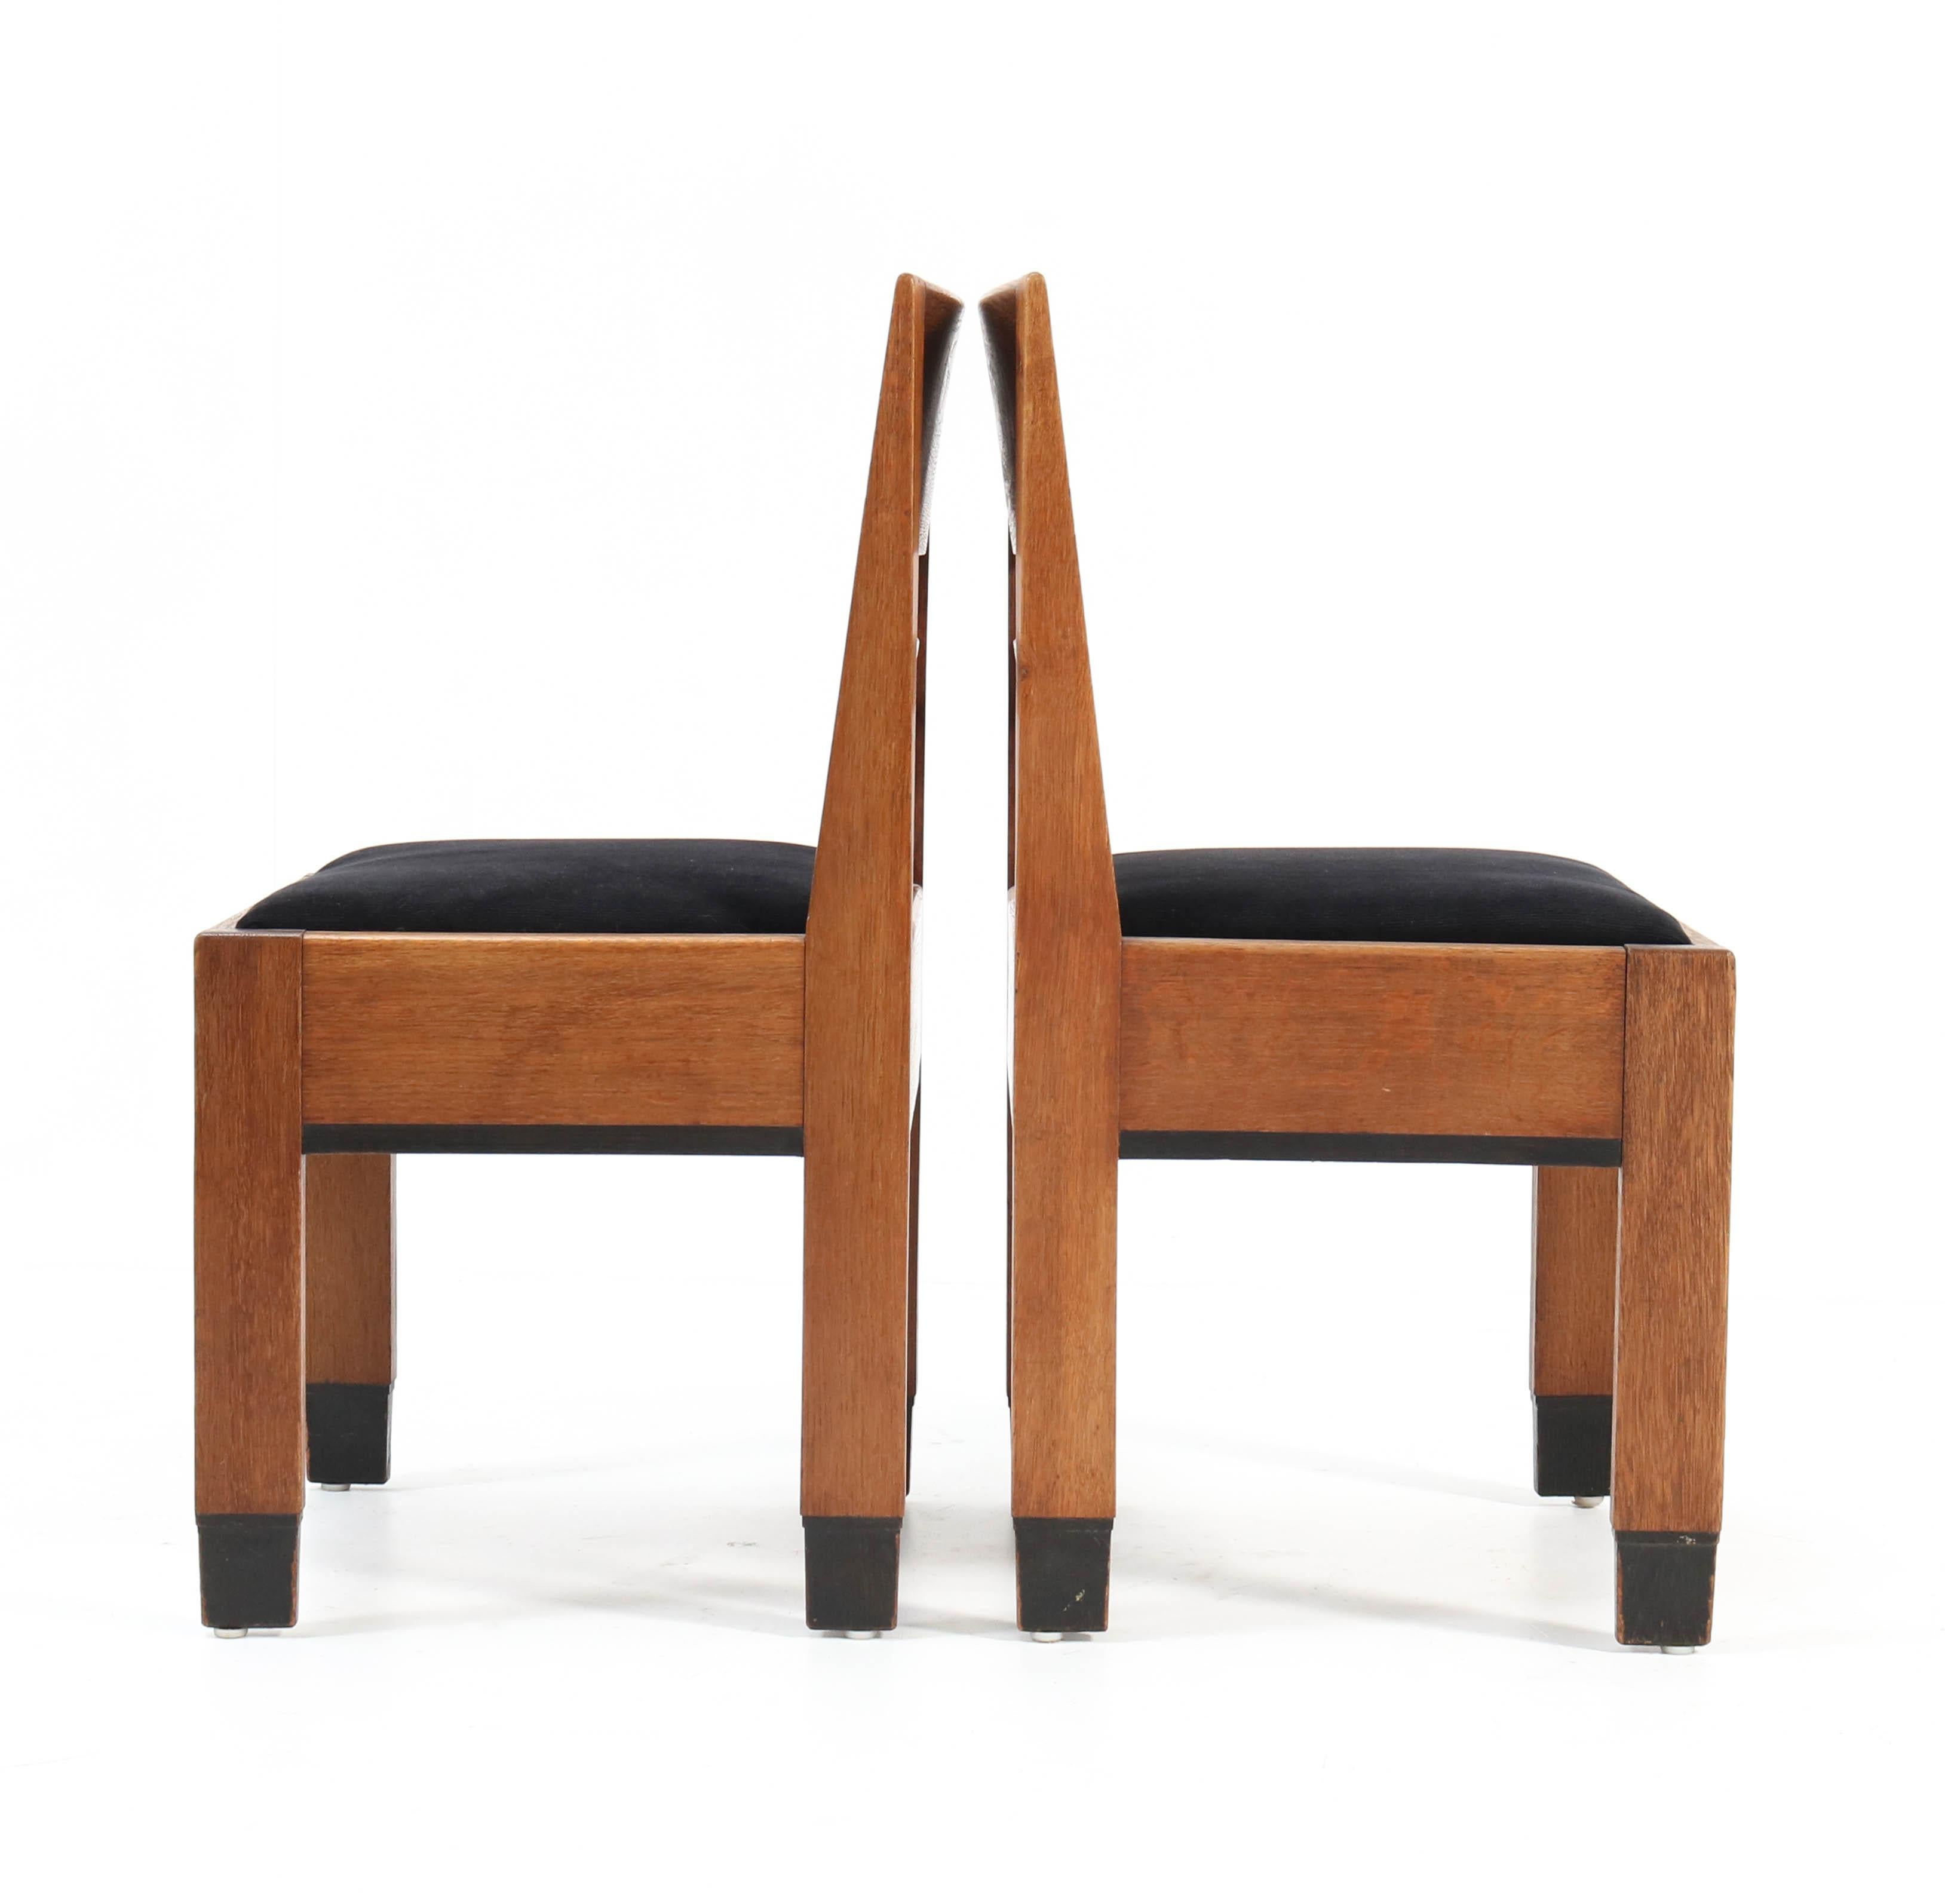 Eight Oak Art Deco Haagse School Chairs by H. Fels for L.O.V. Oosterbeek, 1924 4